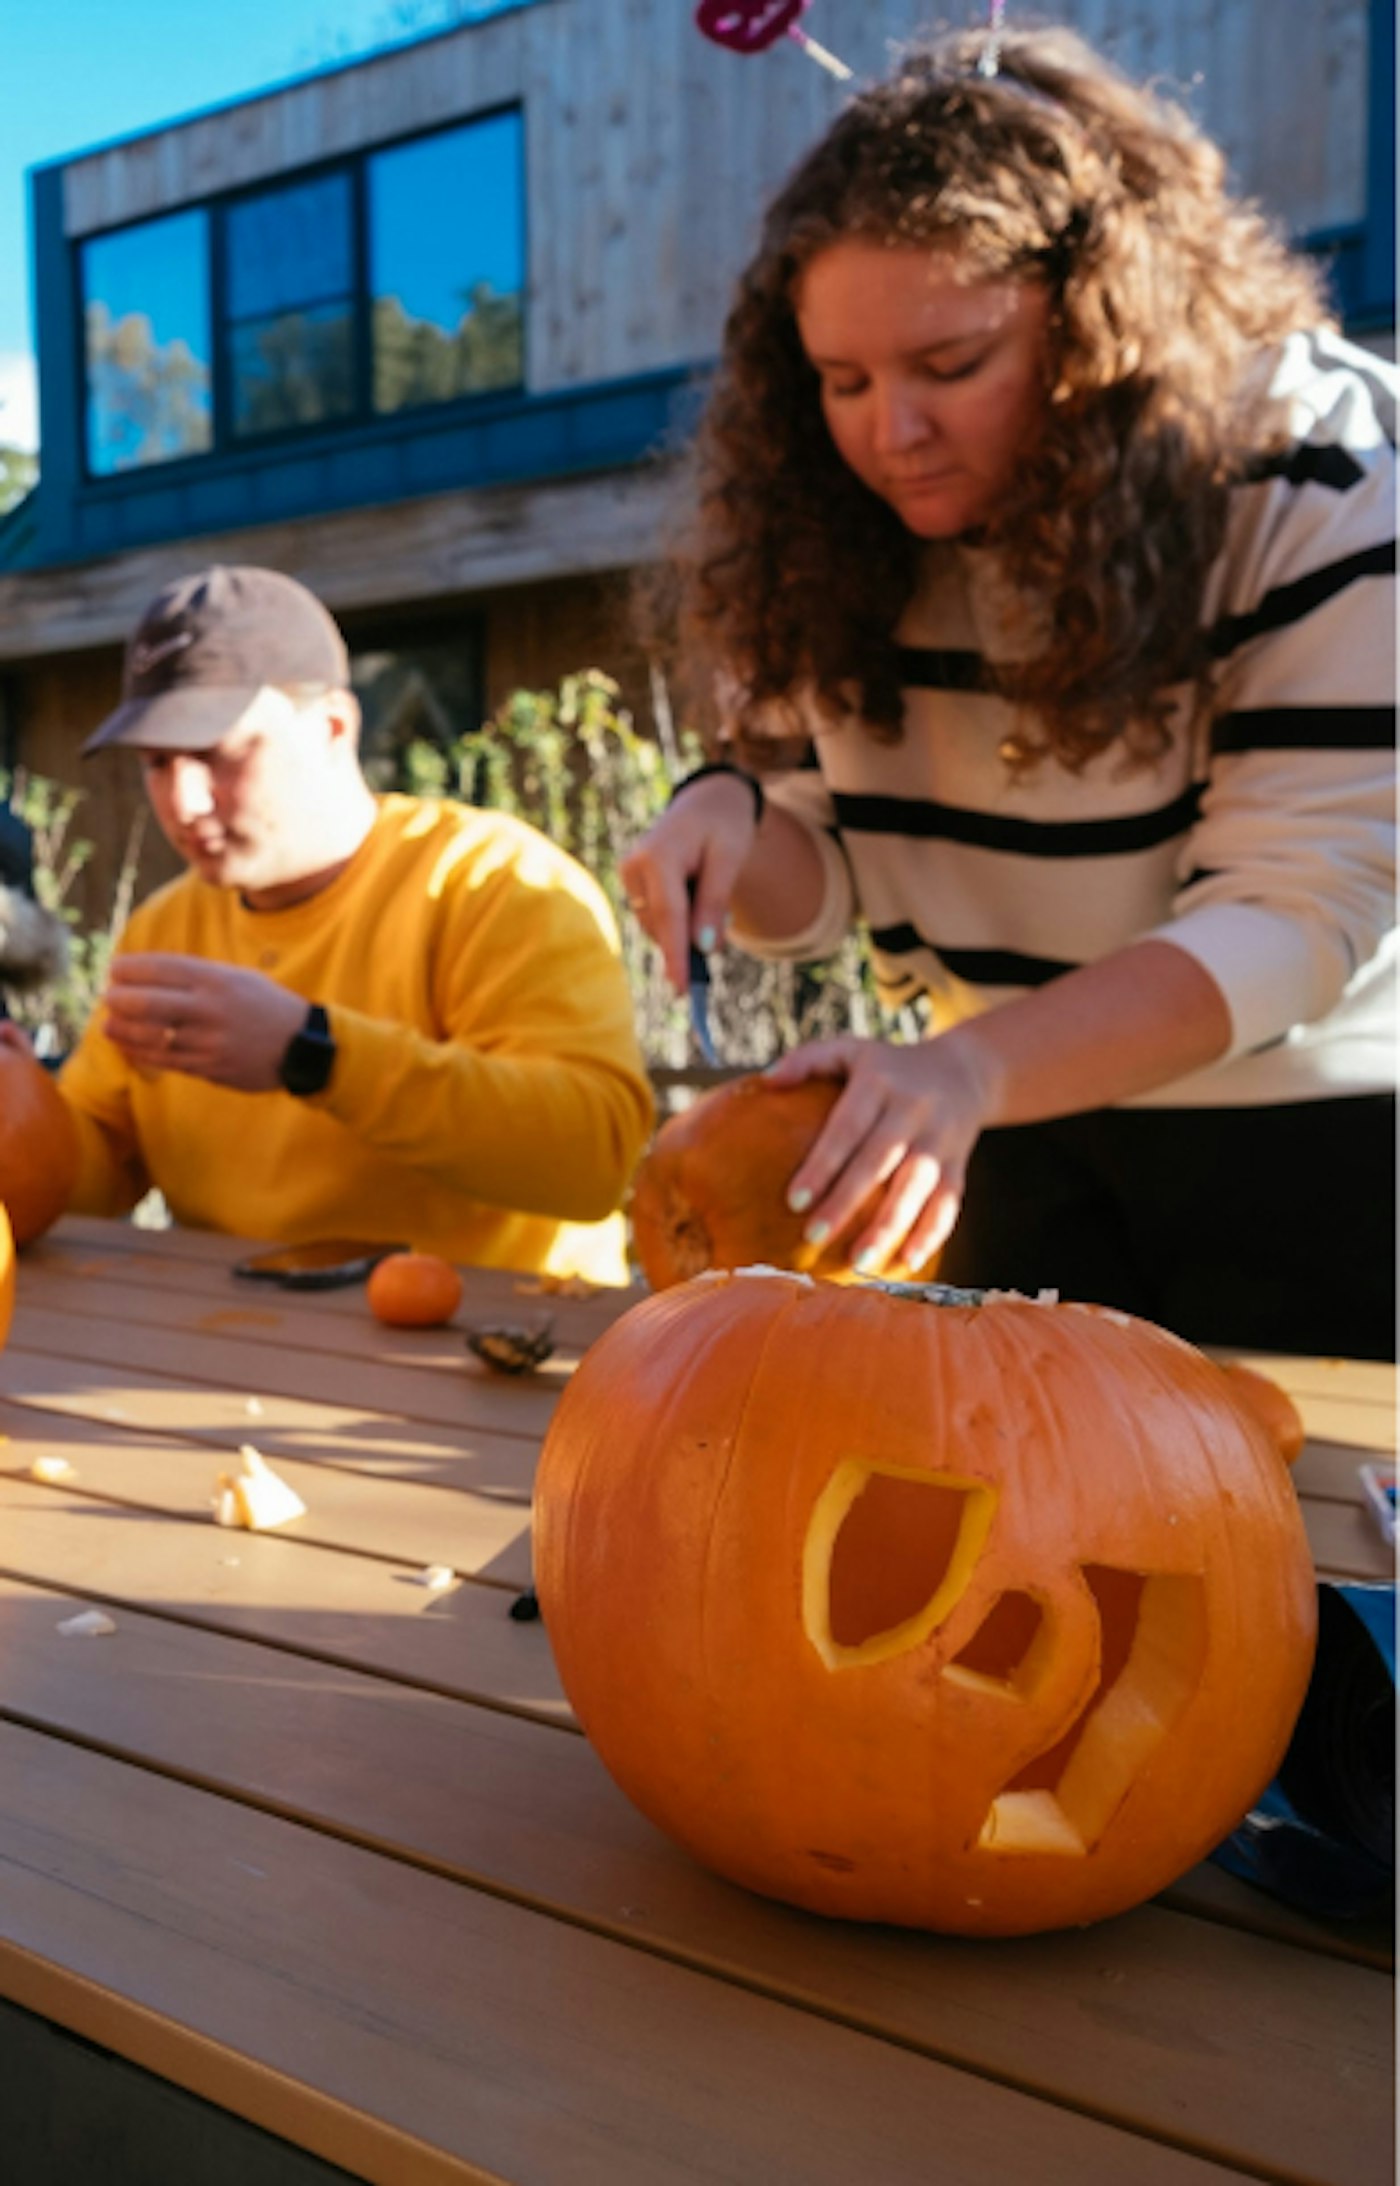 People carving Halloween pumpkins. One pumpkin has the Yummygum logo mark carved out.